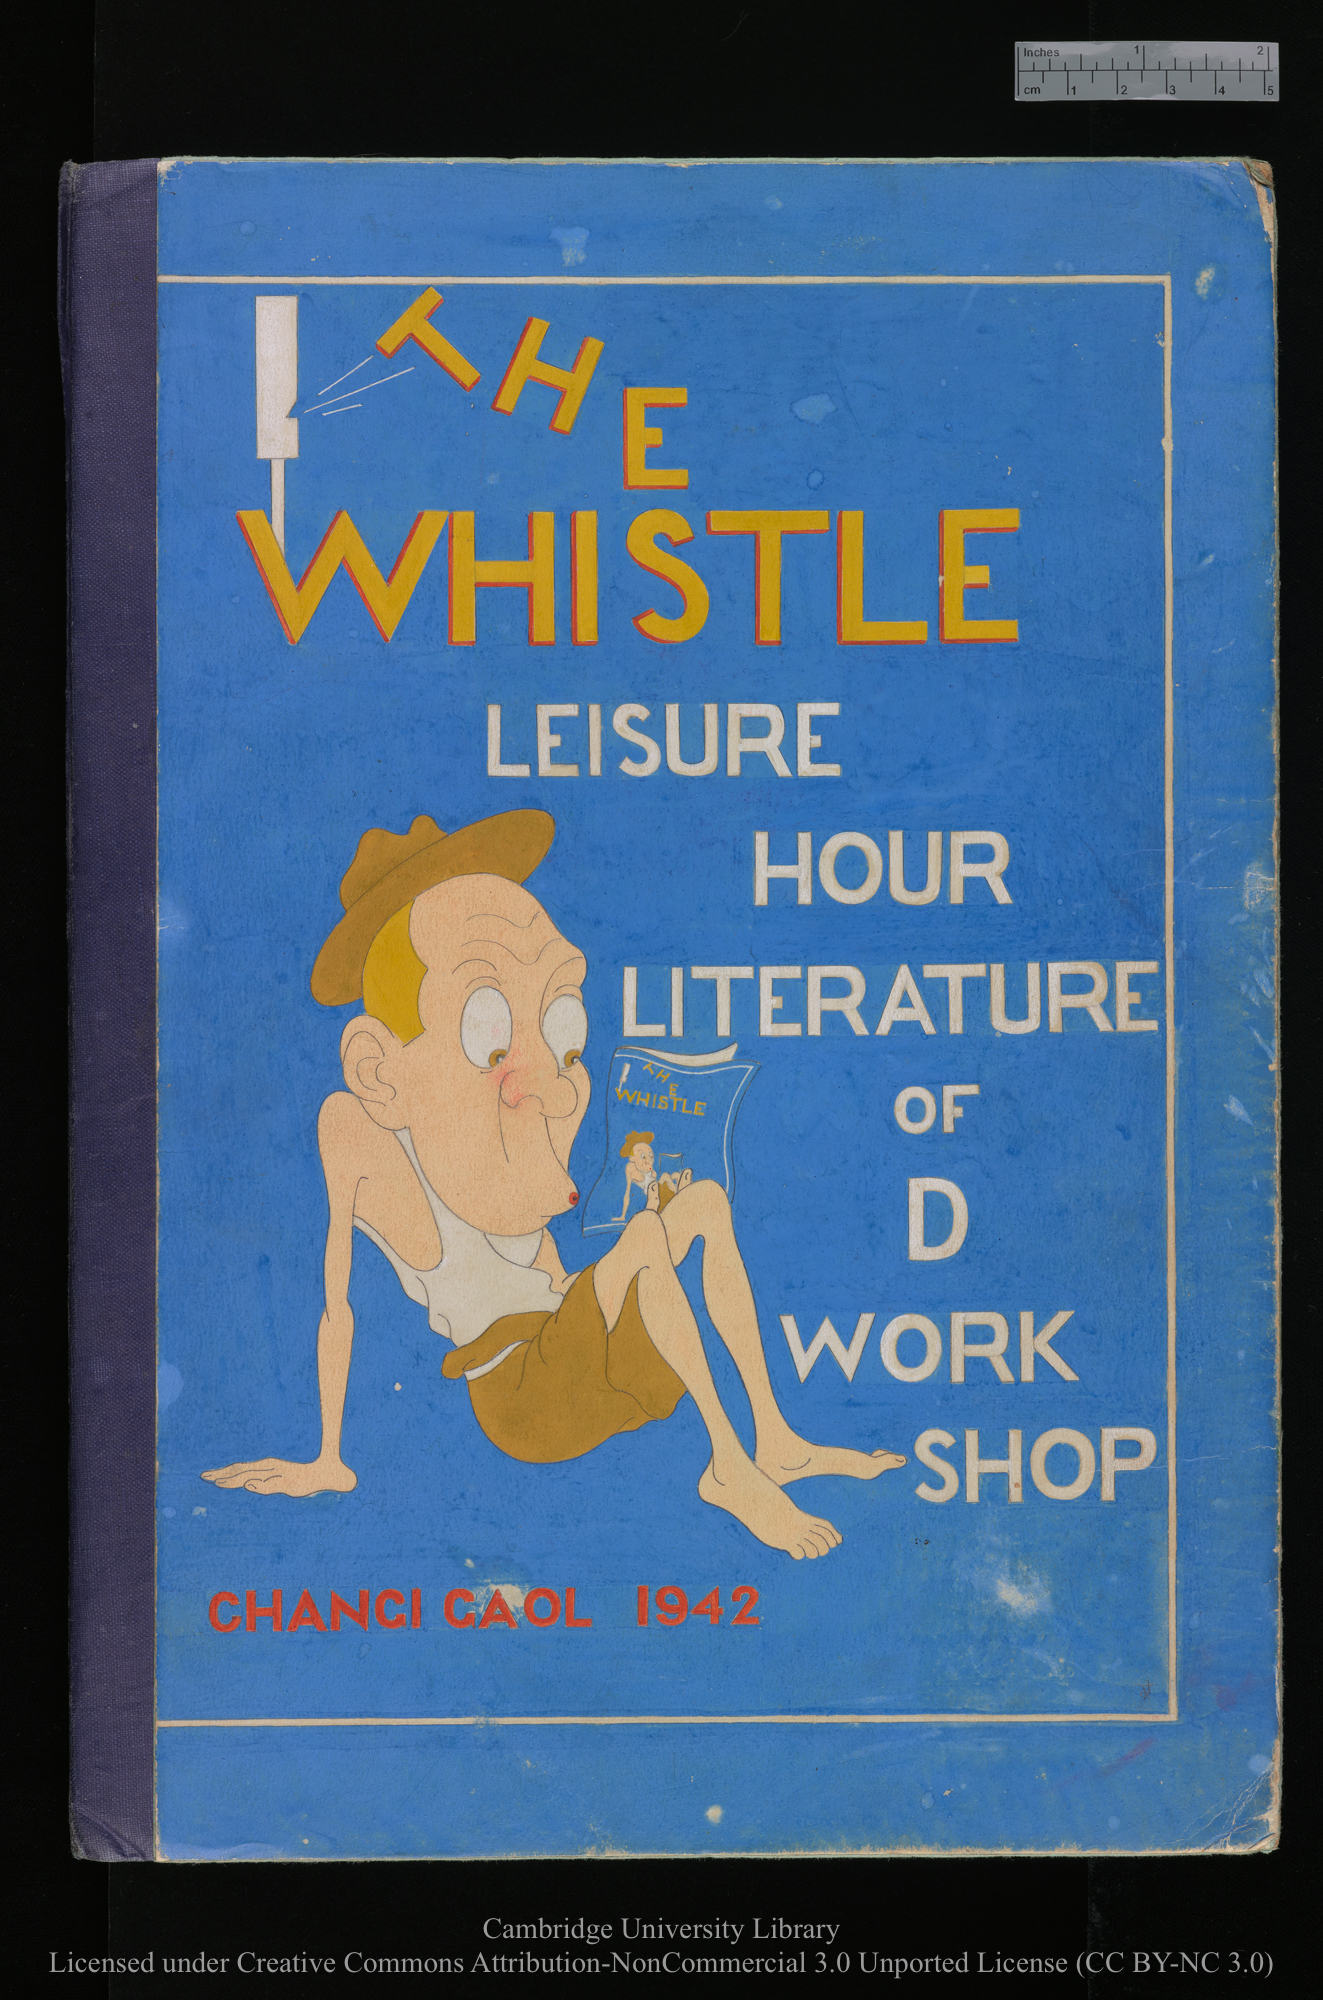 &#39;The Whistle&#39;: manuscript periodical produced in Changi Prisoner-of-War Camp